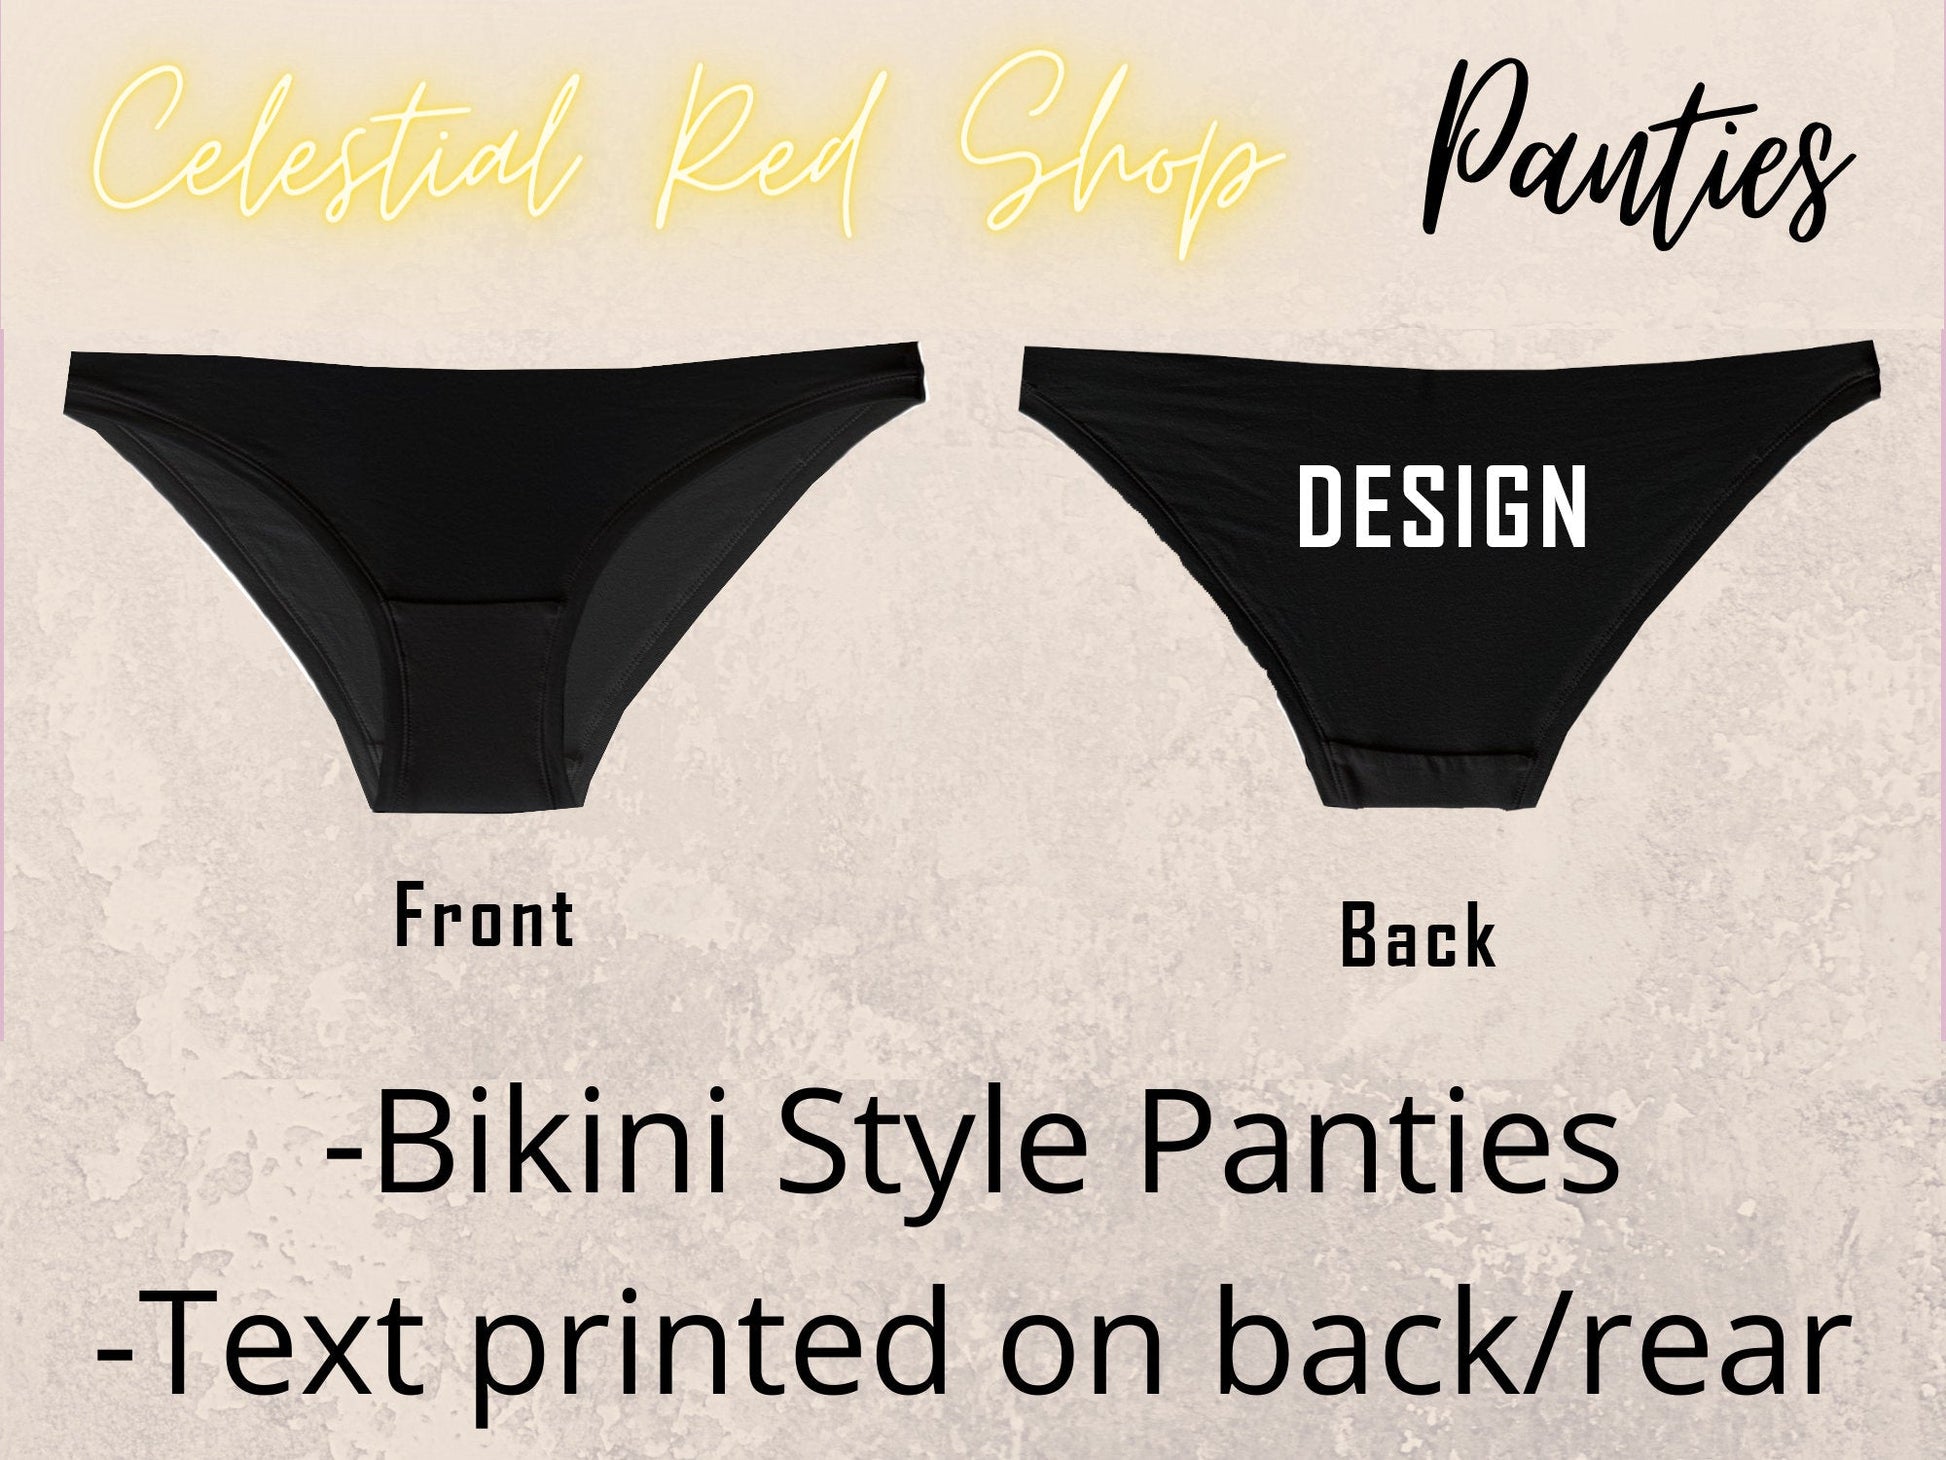 Personalized Custom Sexy Panties With Text on Front & Back Option